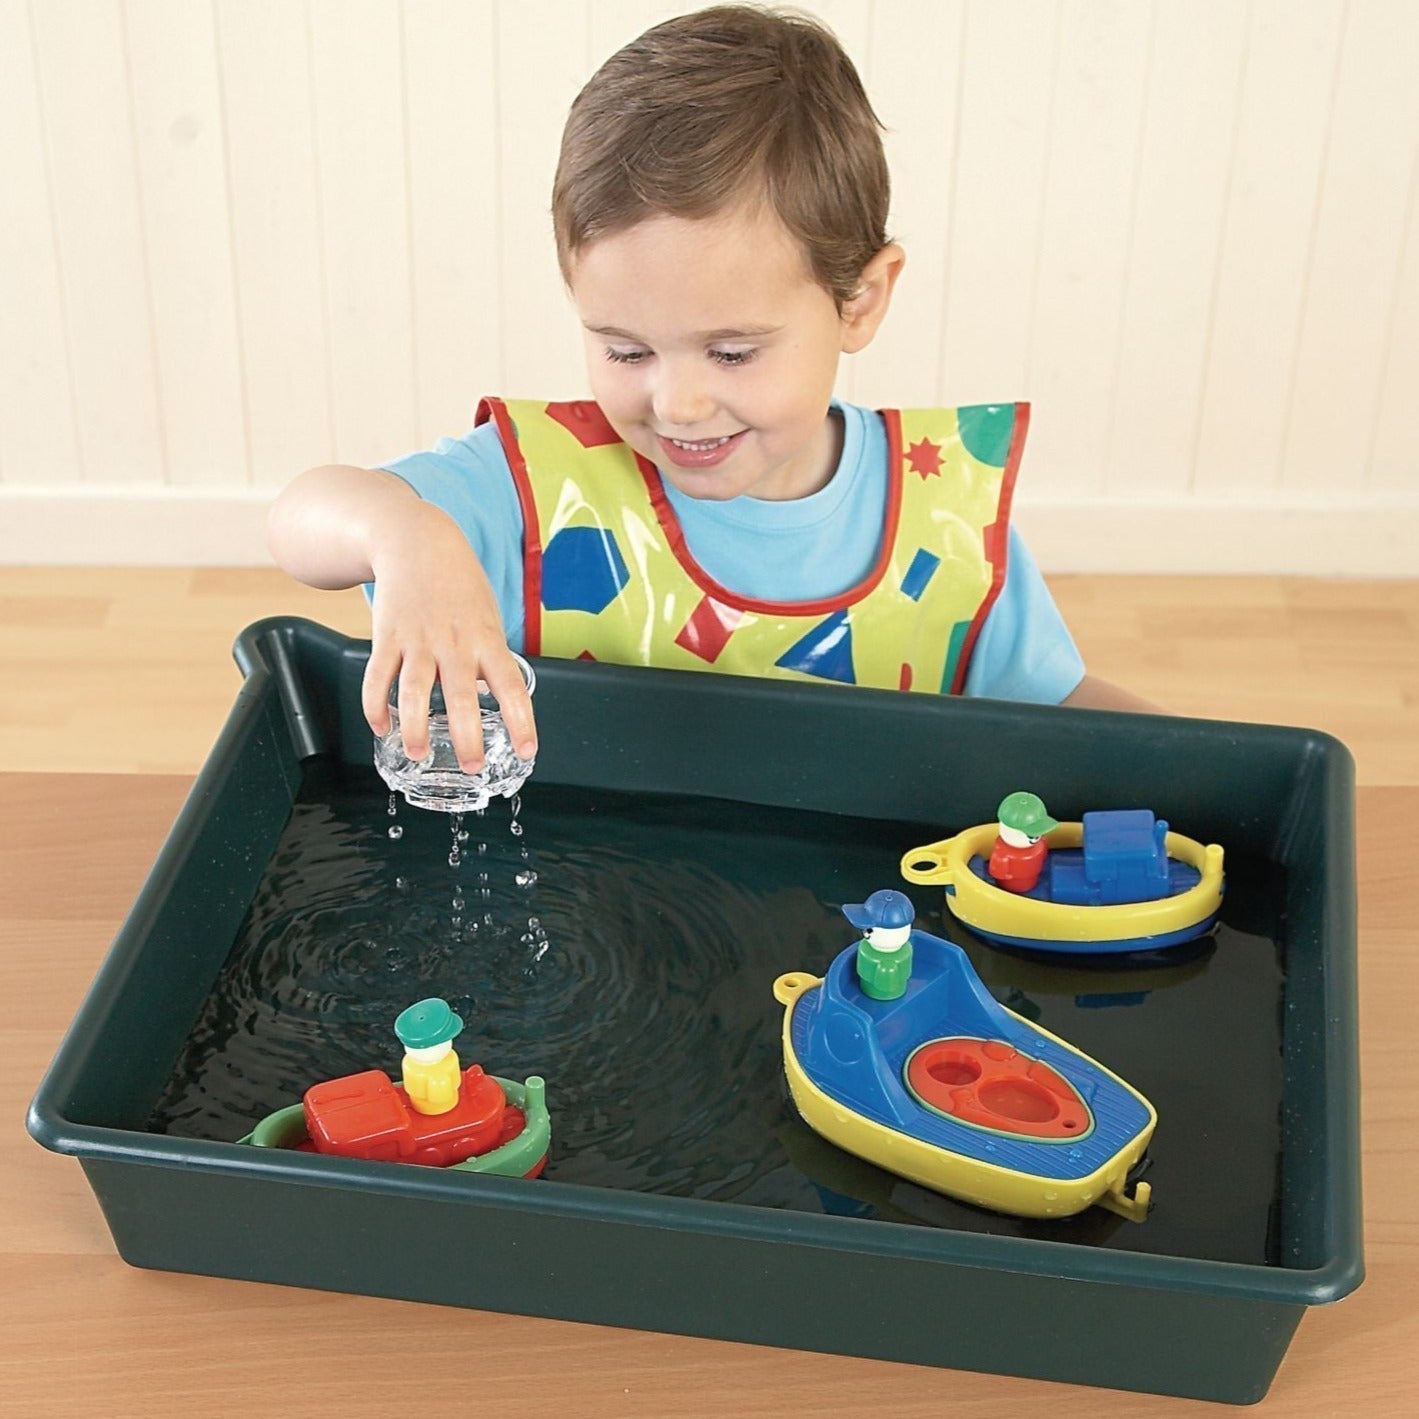 Pouring Tray, The Pouring Tray is a durable plastic tray that can be used inside or outside, on the floor or on a table top. The Pouring Tray is lightweight and the perfect size for children to easily move from one location to another. It is a versatile resource that is especially useful when using liquids due to its corner spout. The Pouring Tray can be used for: Sand and water play Gardening activities Scientific experiments Messy play Size: W400 x L530mm x Depth 95mm., Pouring Tray,Water play tray,water 